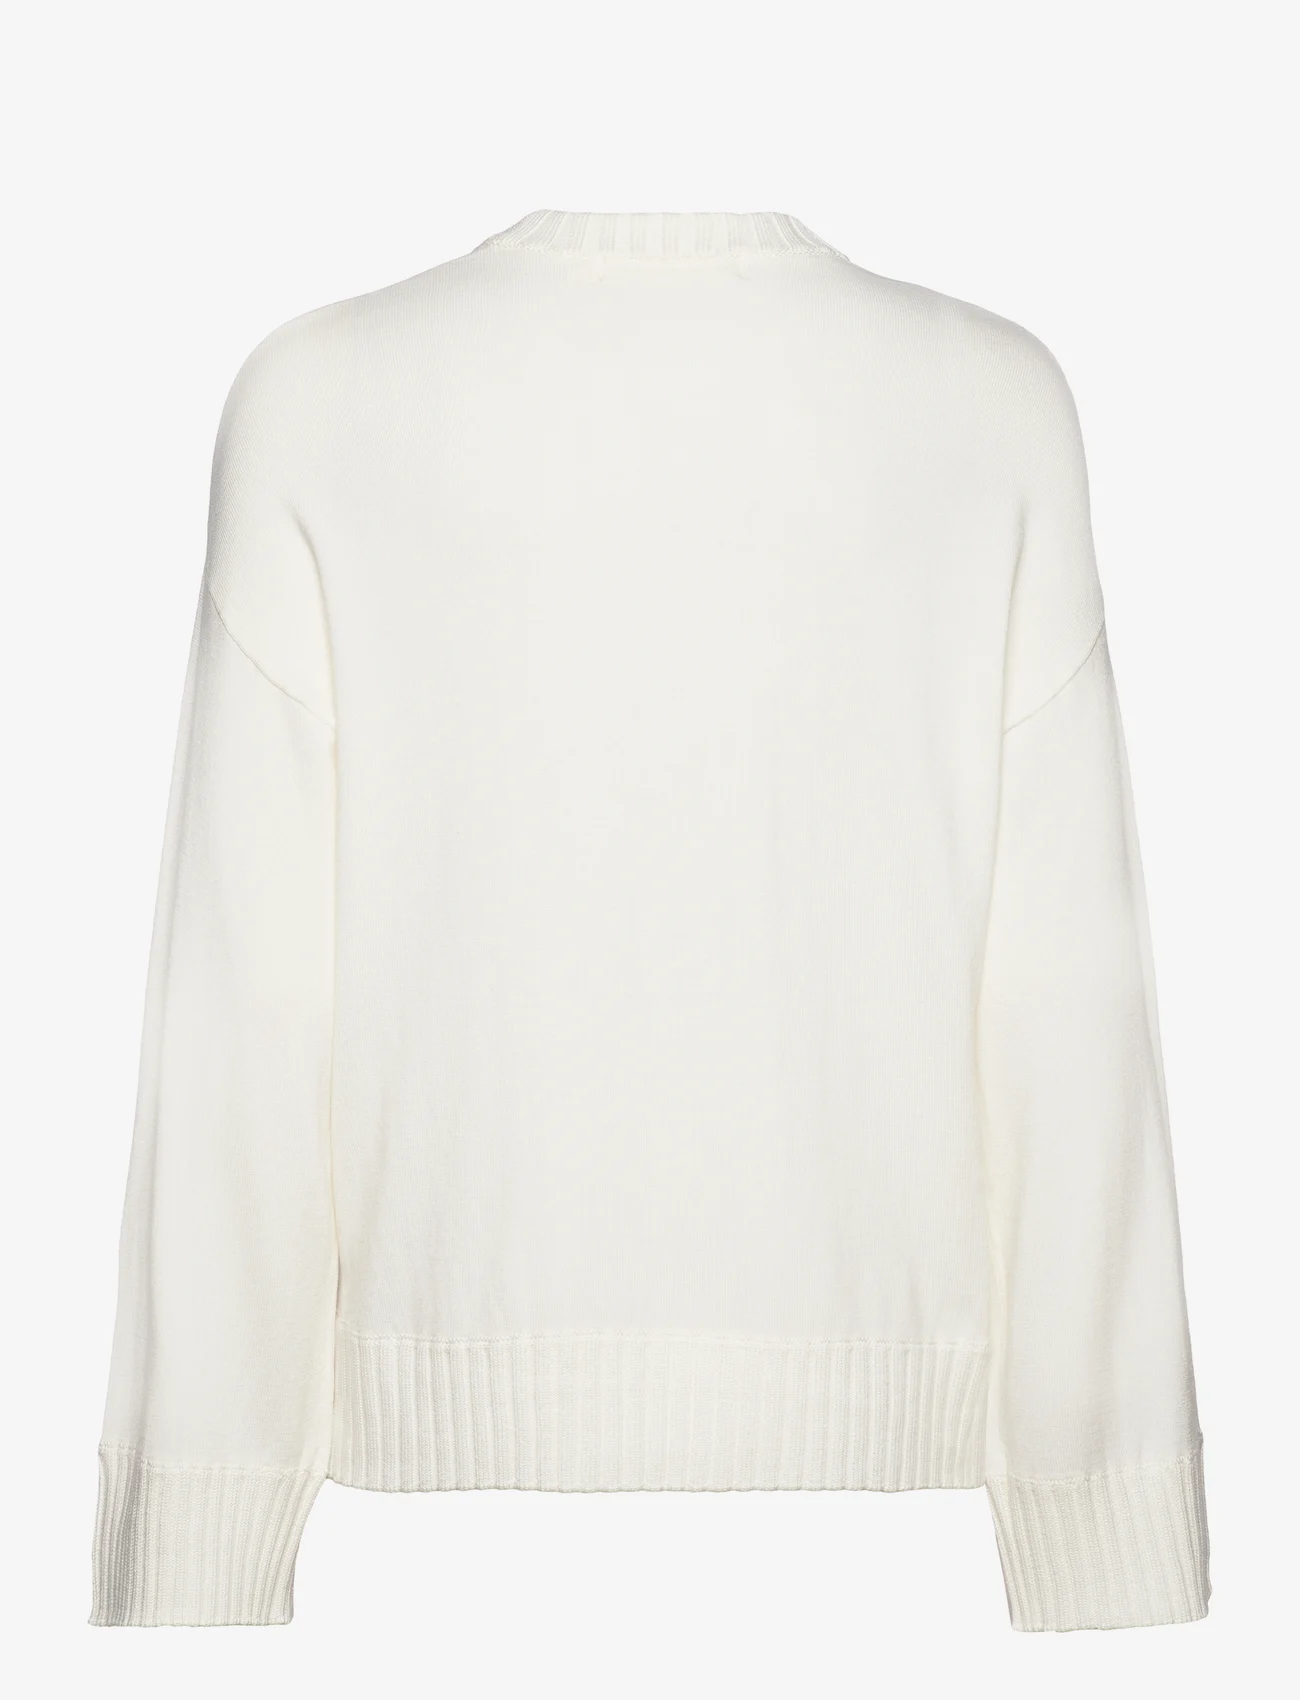 InWear - OrkideaIW Pullover - jumpers - whisper white - 1